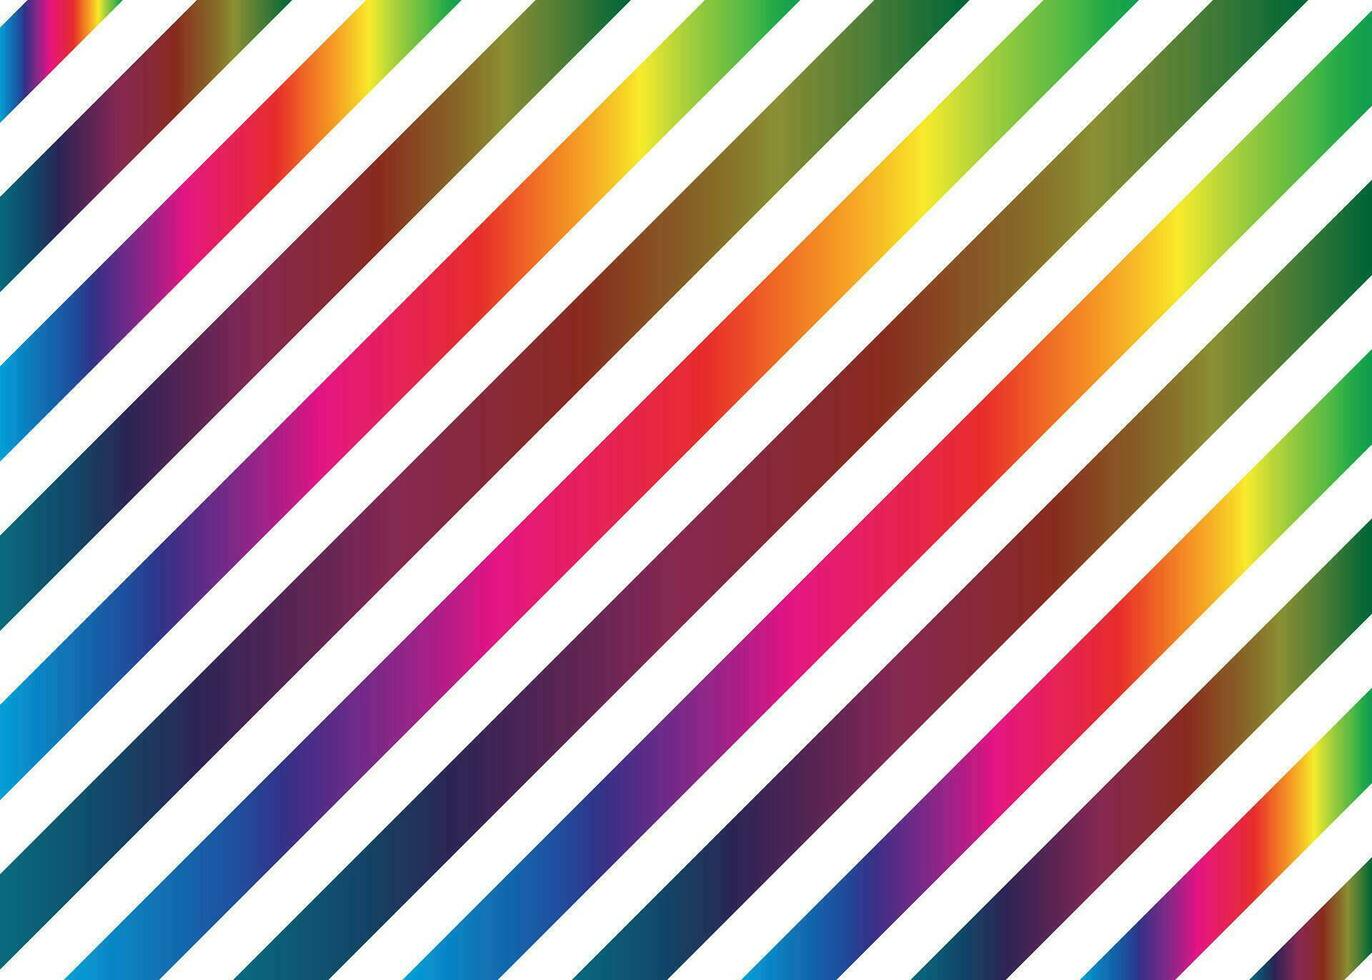 Abstract background diagonal stripes pattern vector illustration.